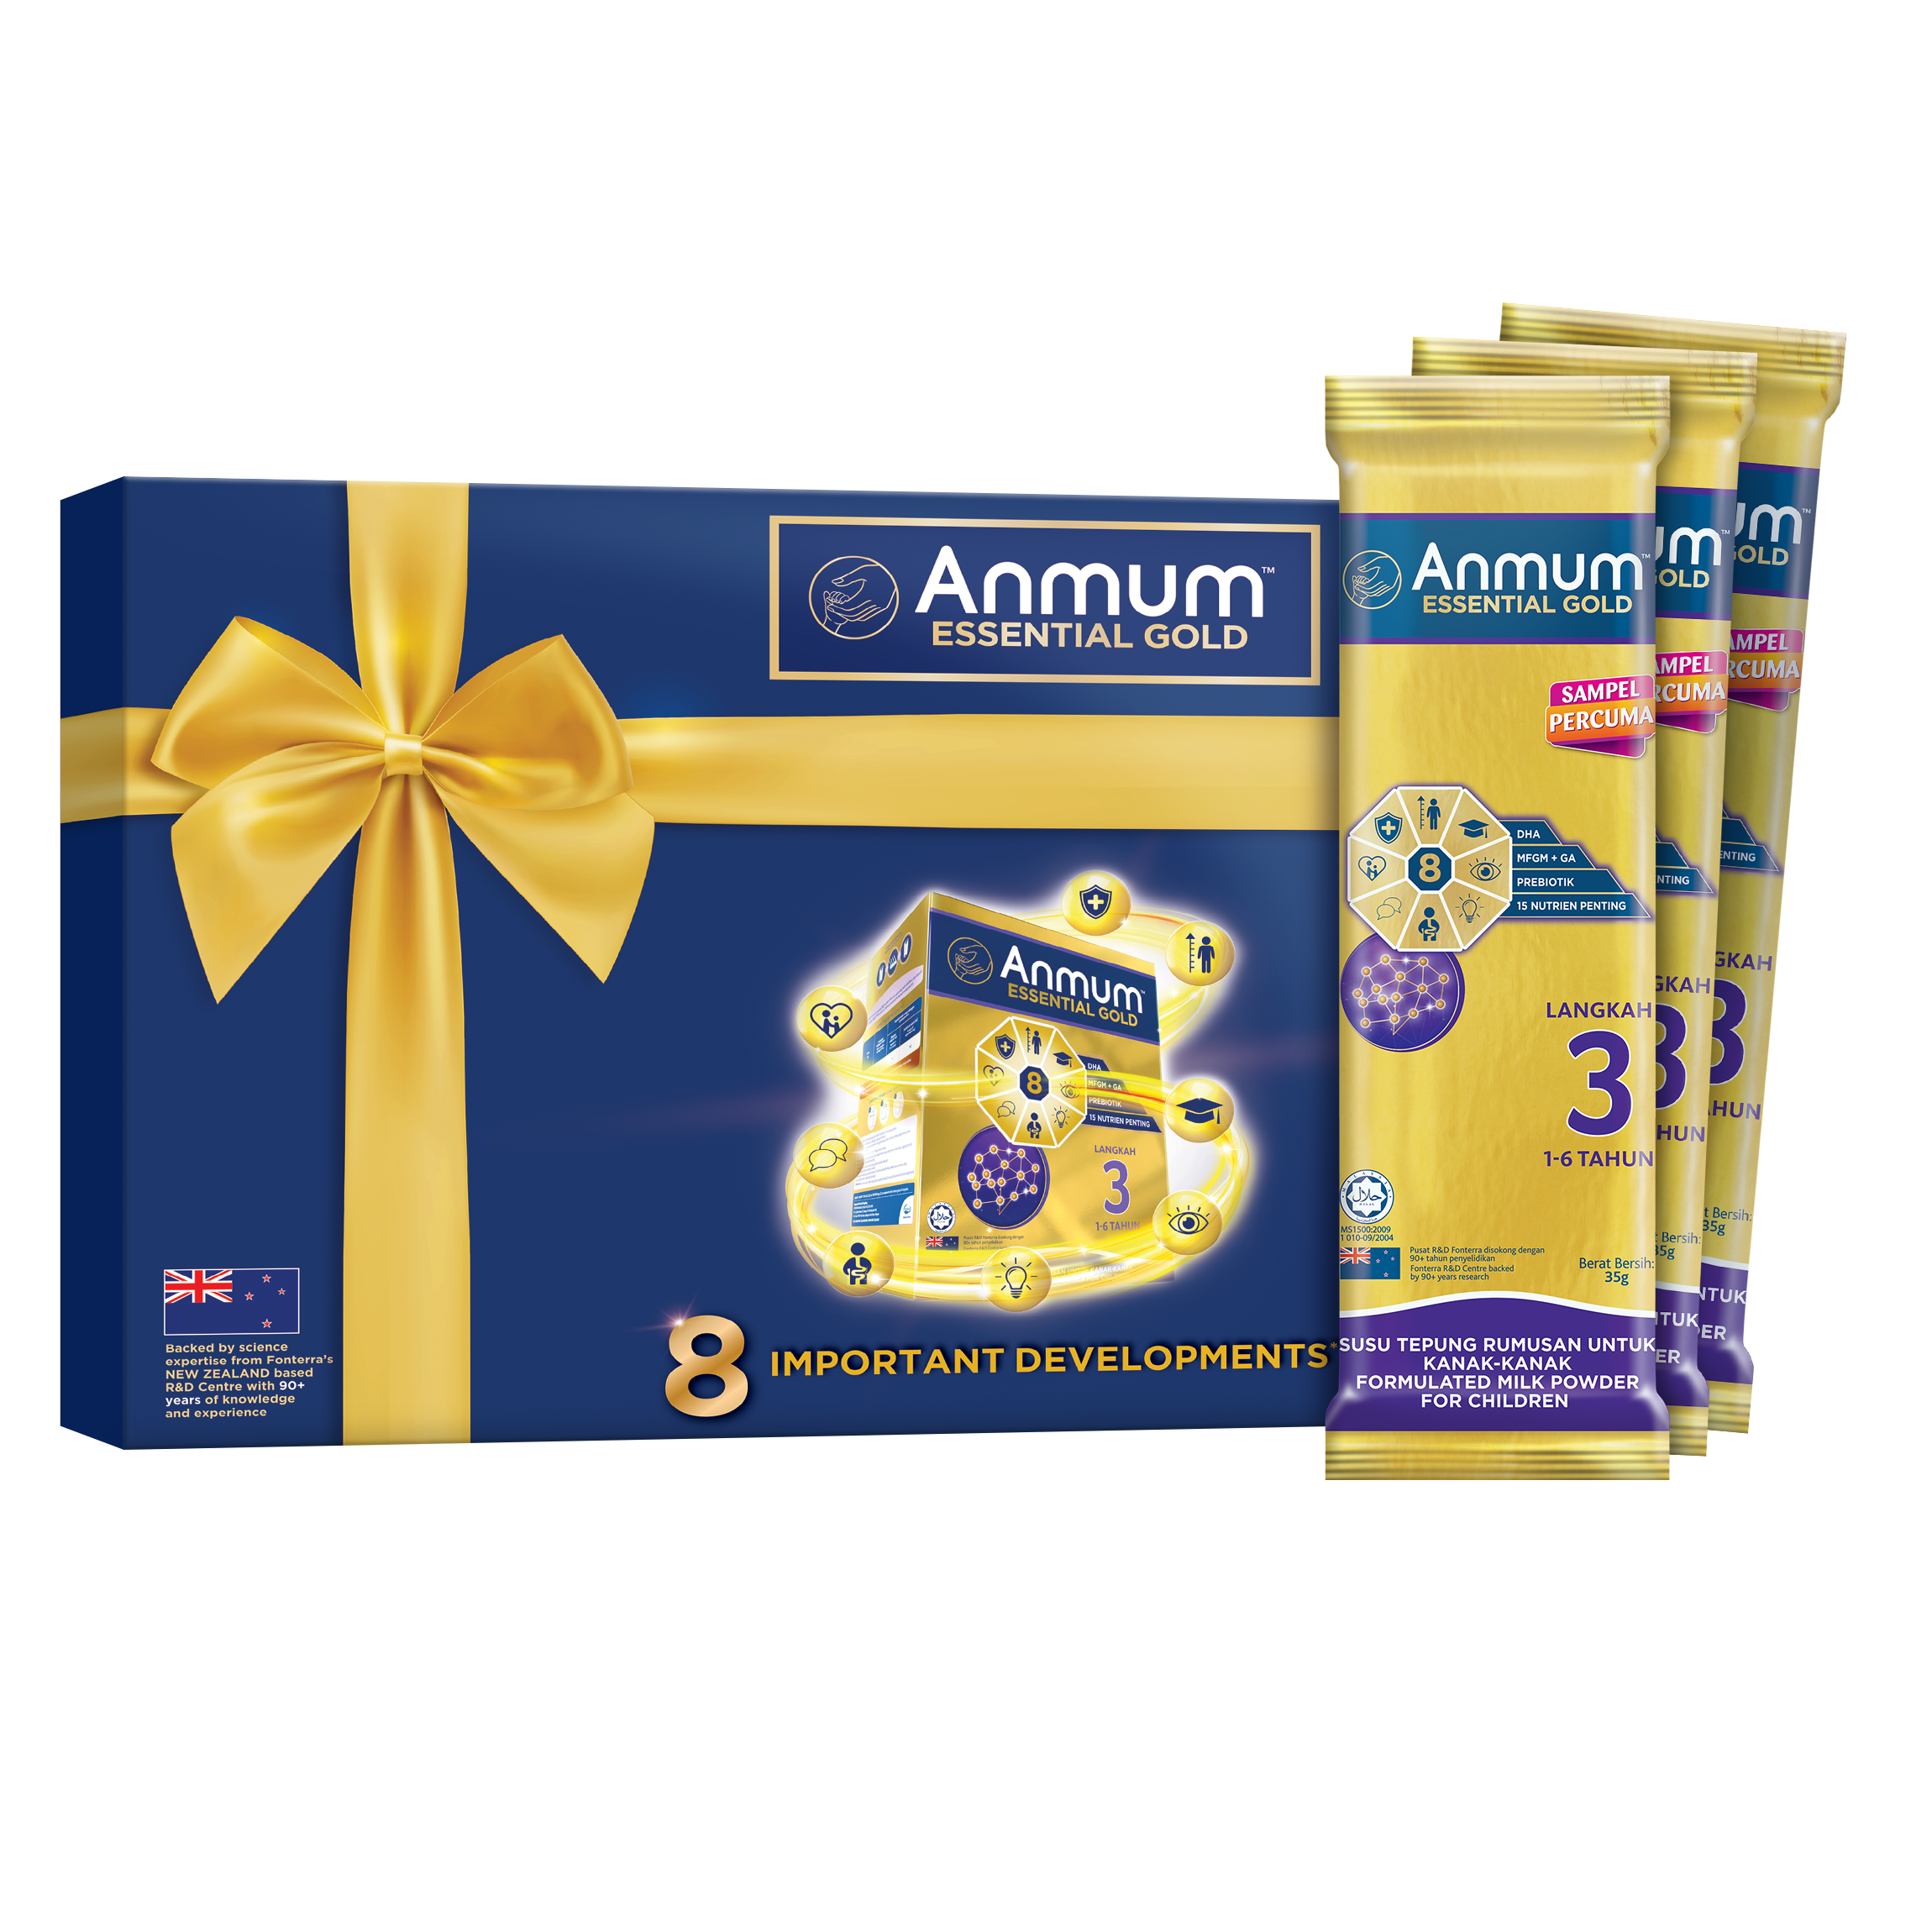 Anmum™ Essential <span class="text-gold">Gold</span>